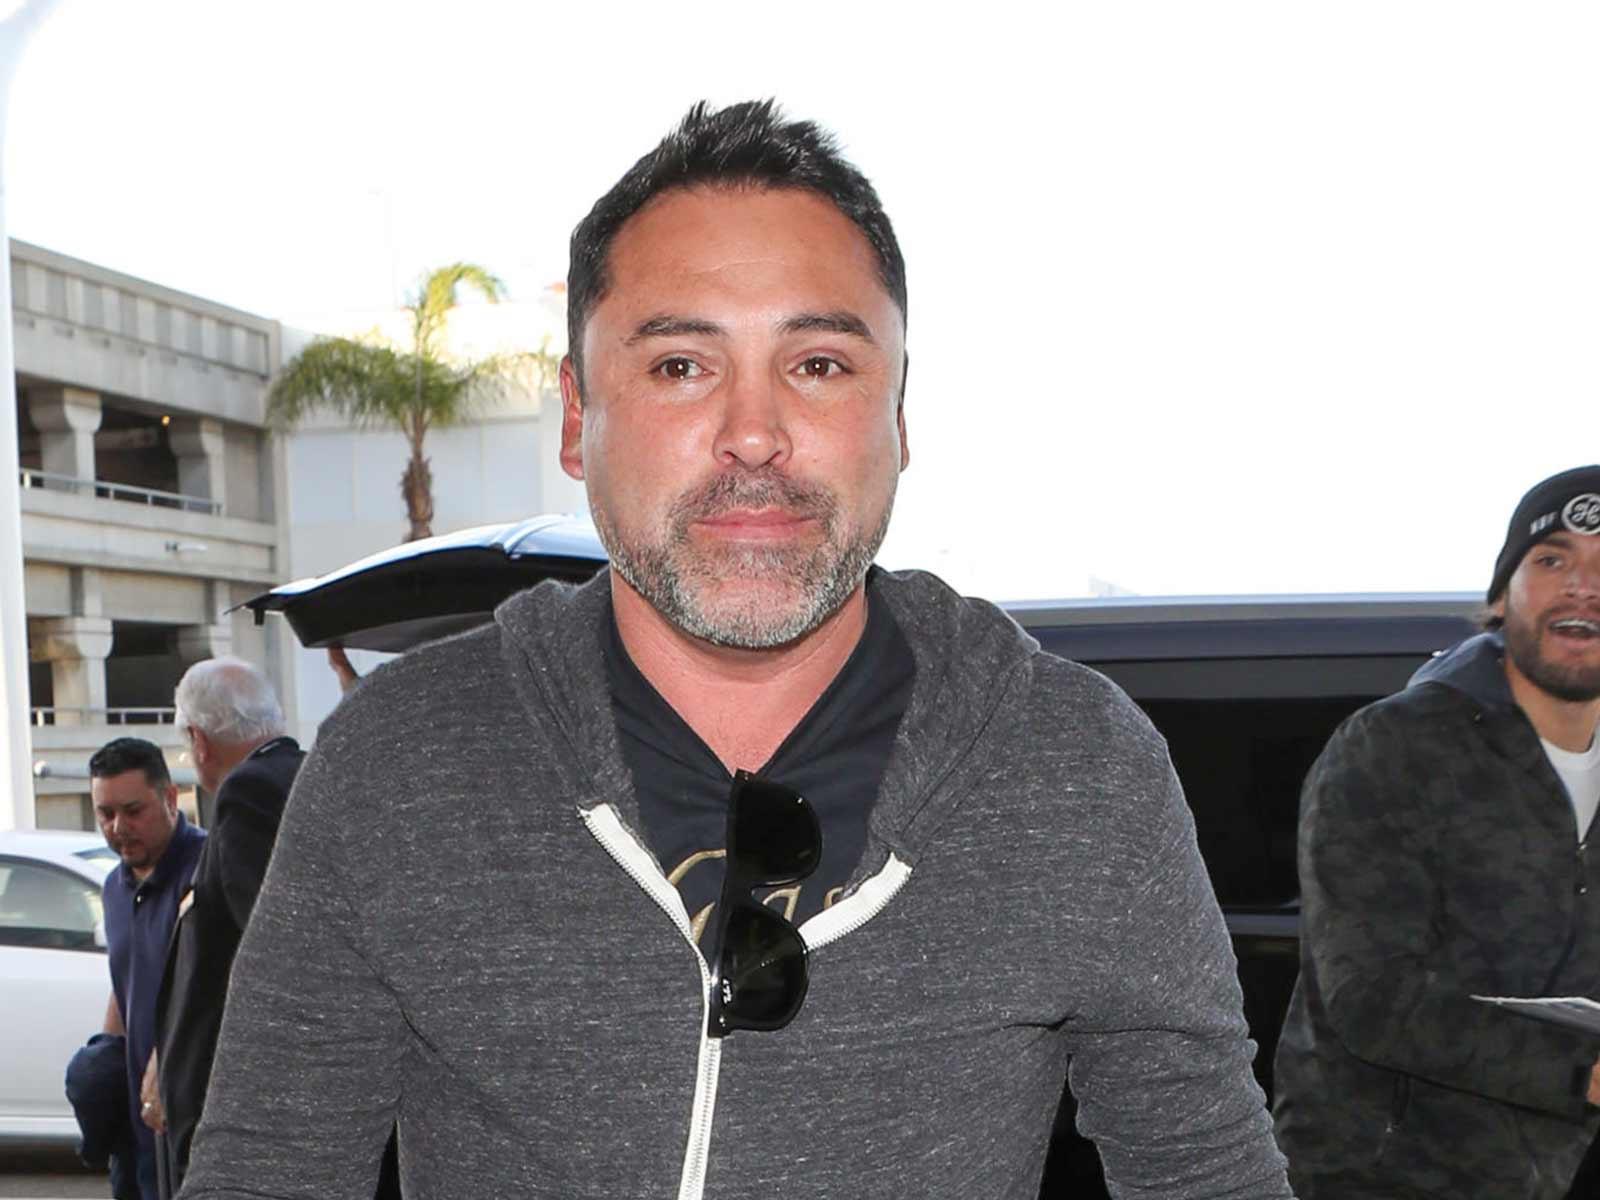 Oscar De La Hoya Admitted Cocaine and Alcohol Use to FBI During Extortion Investigation